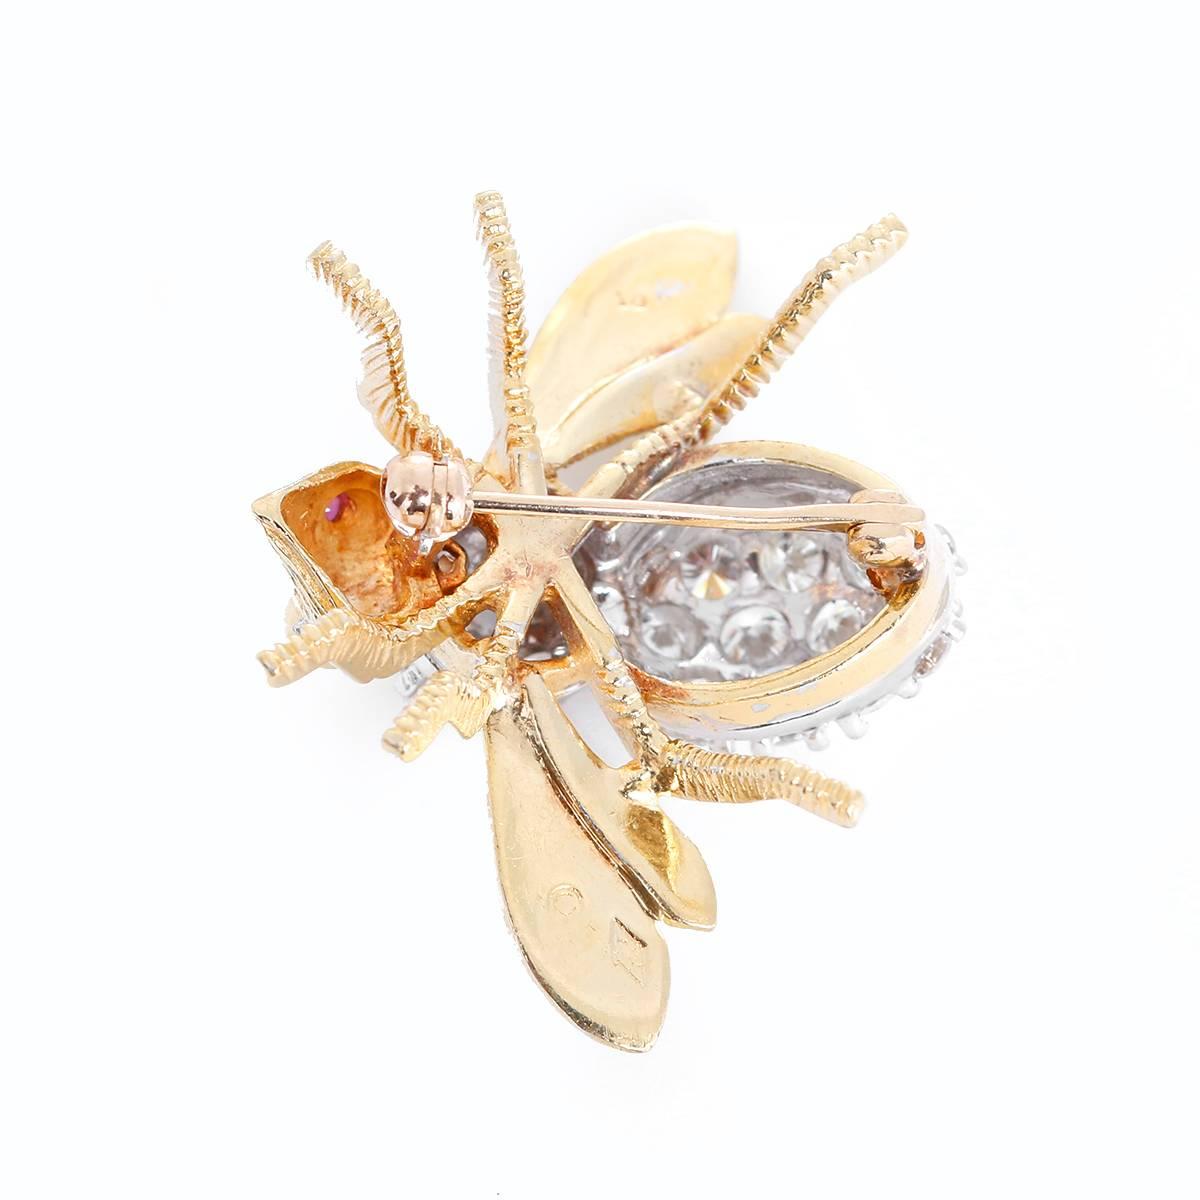 This amazing large bee pin features 2.3 ctw. (F-G Color and VS2-Clarity) of diamonds set in 18k yellow gold.  Pin measures apx.  1-1/4 x 1-inch.  Total weight is 10.7 grams. Hallmarked, HR and 18K.